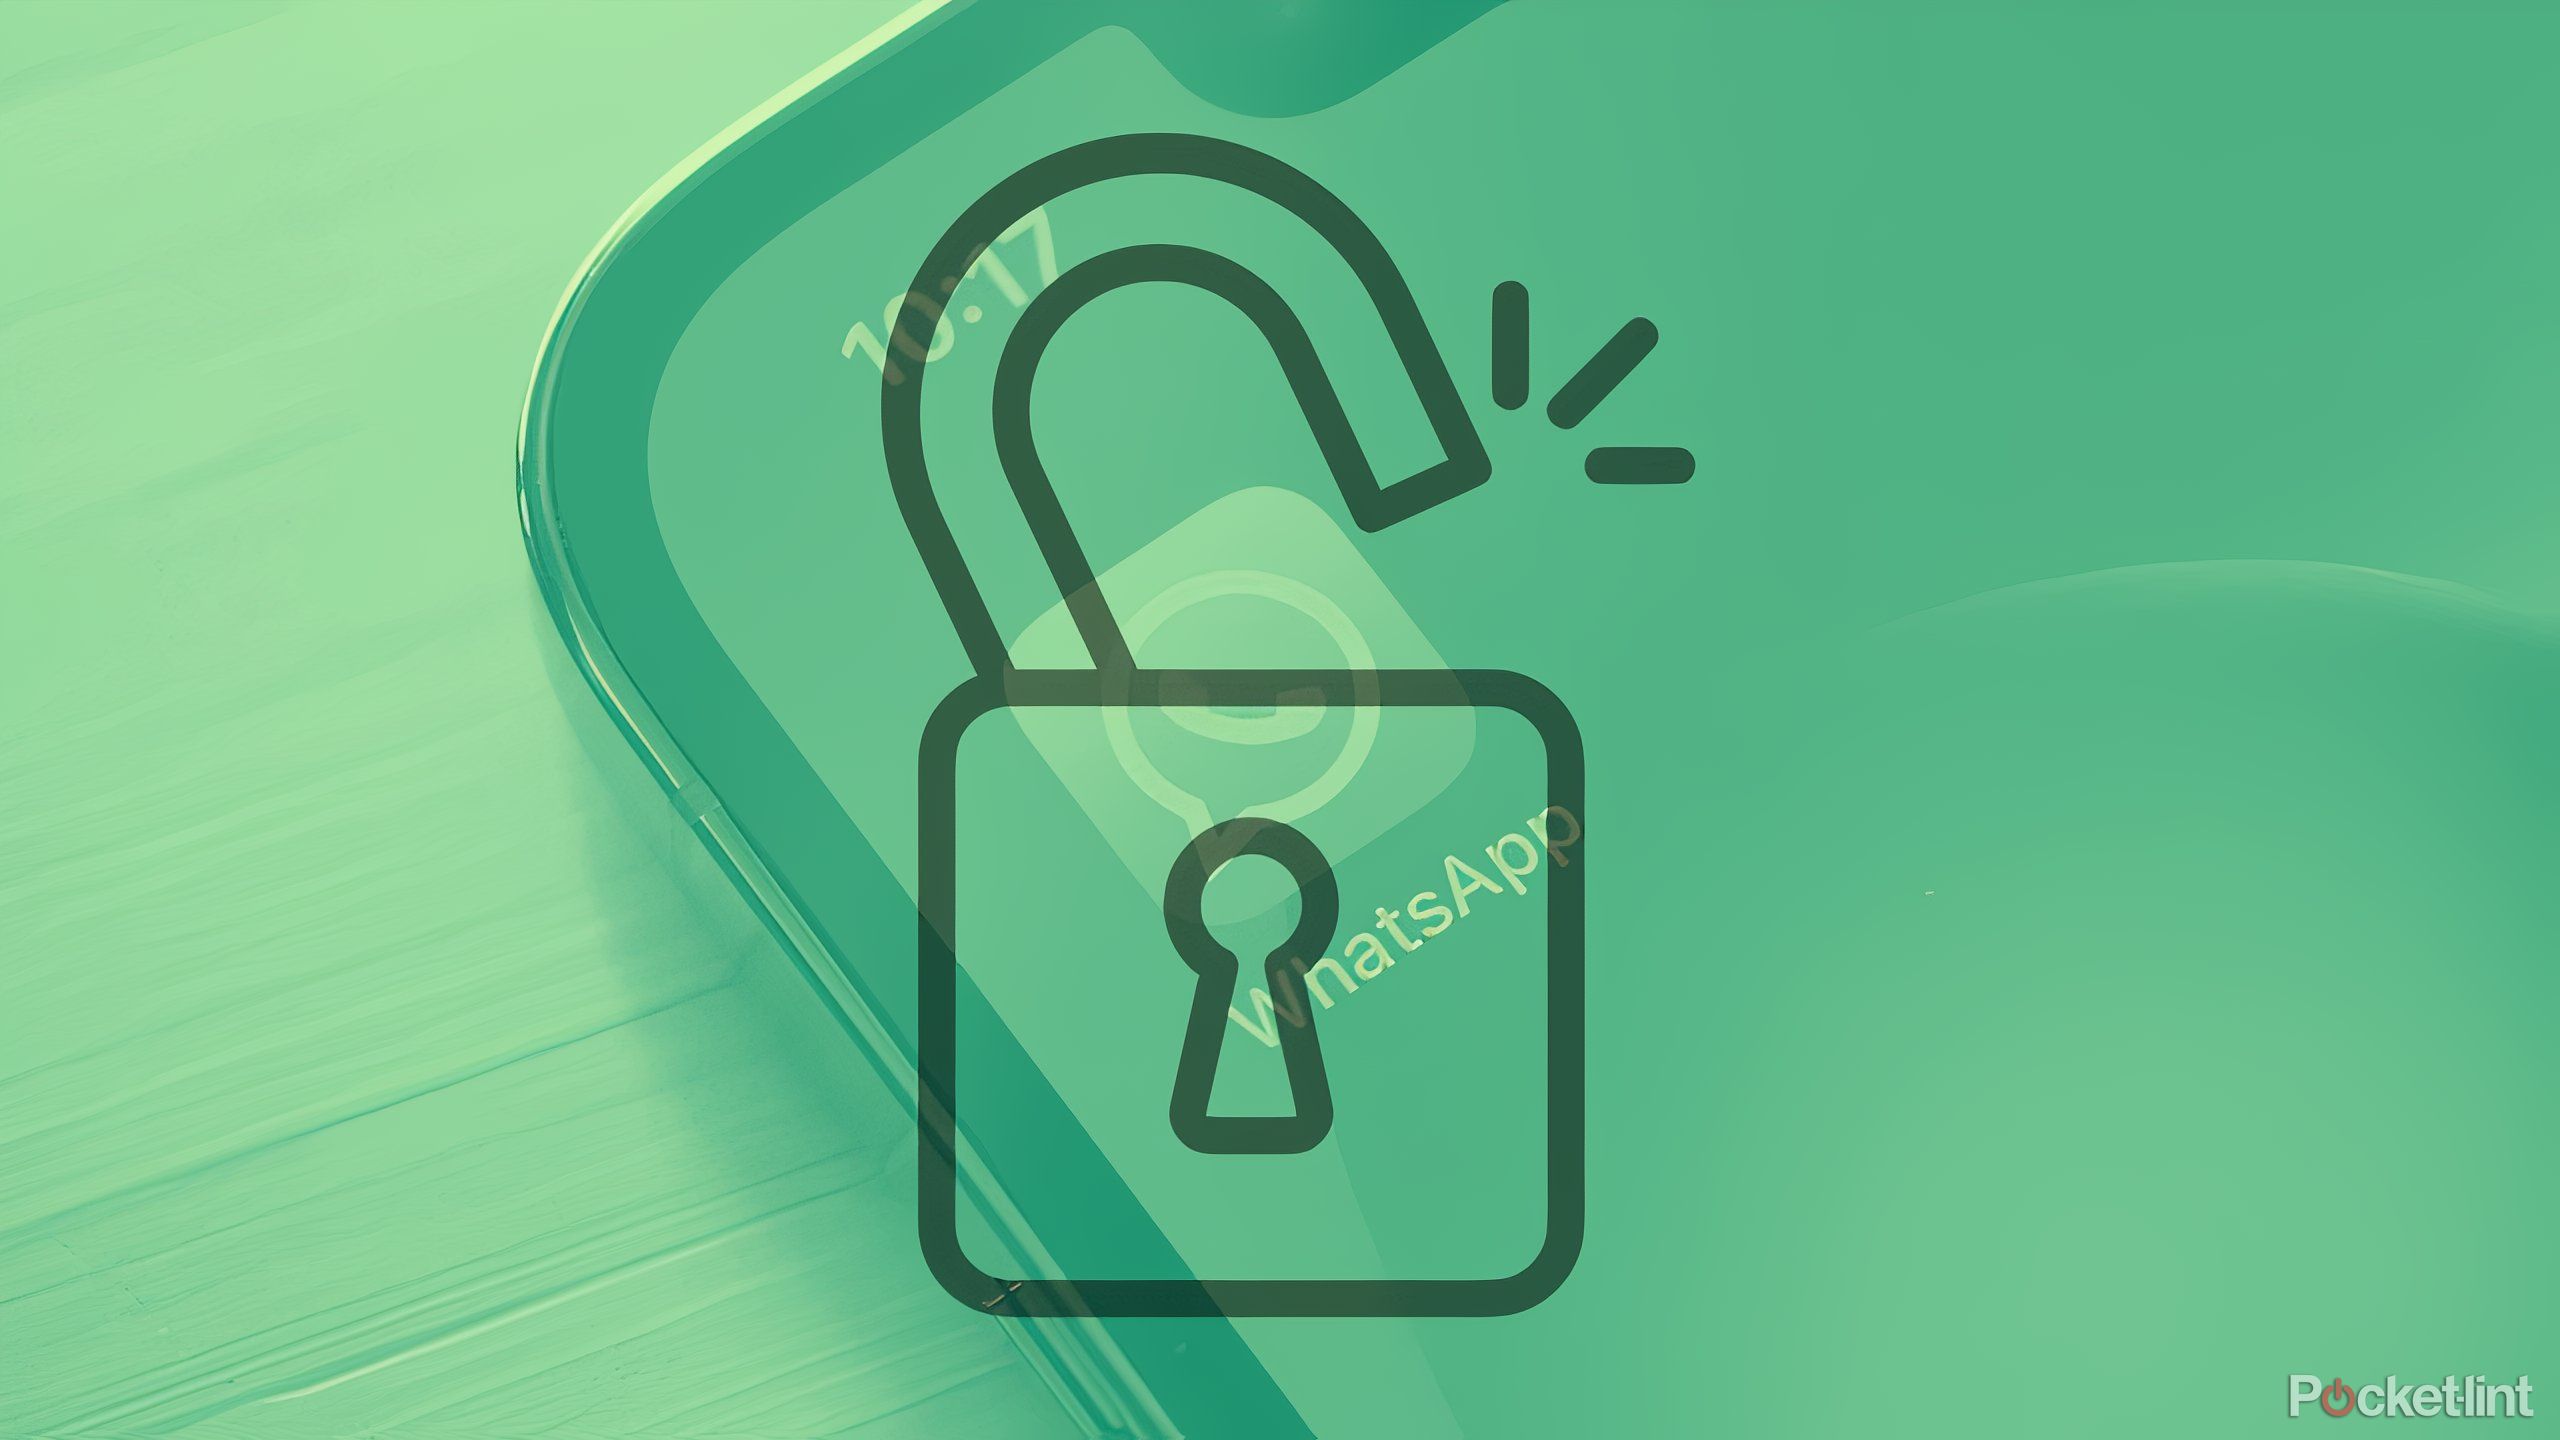 an open padlock superimposed over a phone showing the Whatsapp app